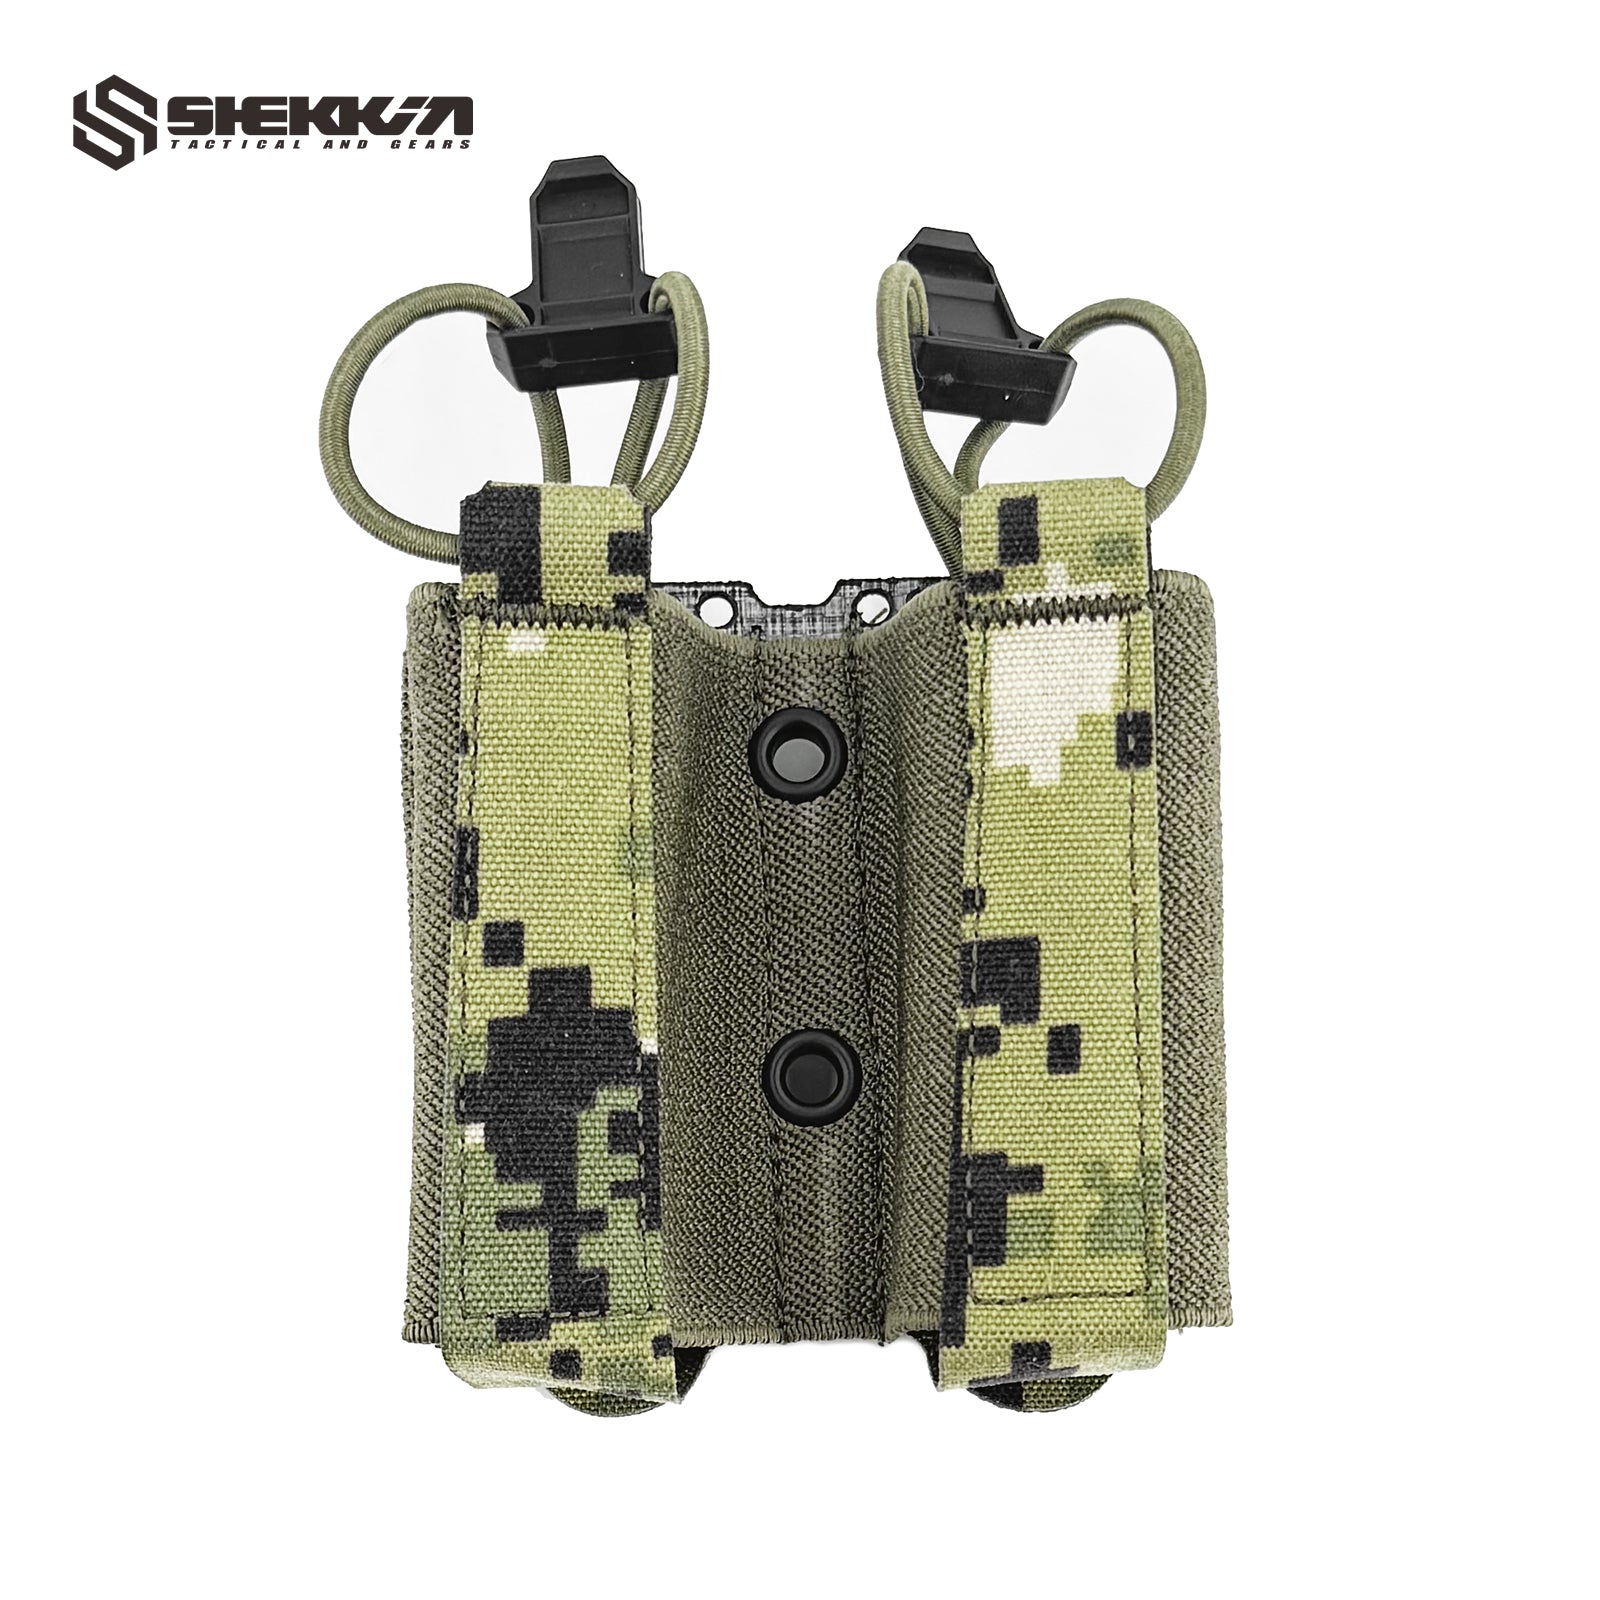 Double 9mm mag pouch with Tegris plate